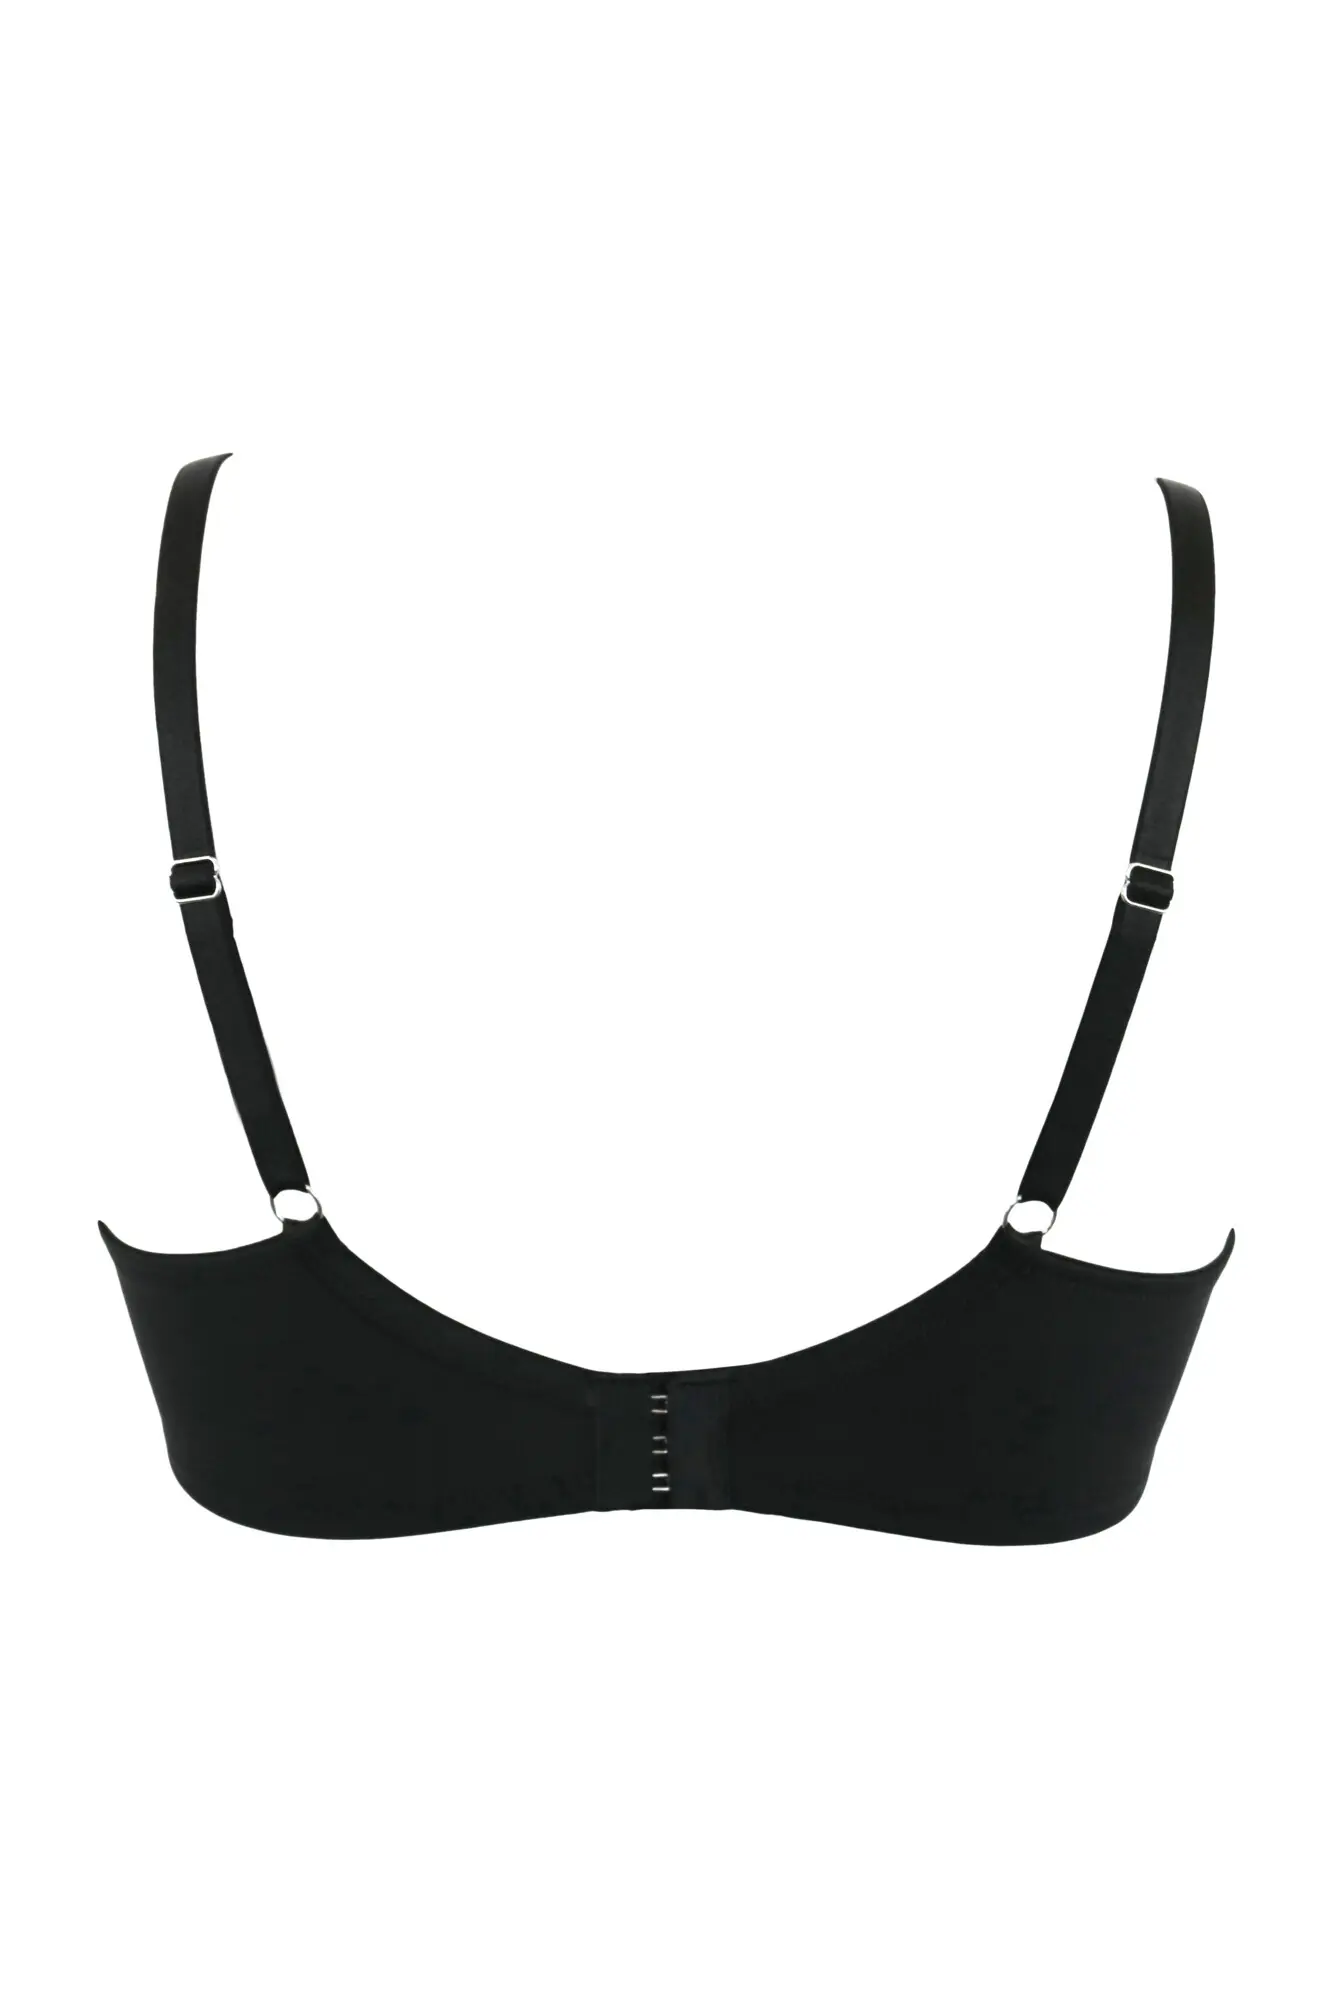 Pour Moi St Tropez Padded Non-Wired T-Shirt Bra - Black